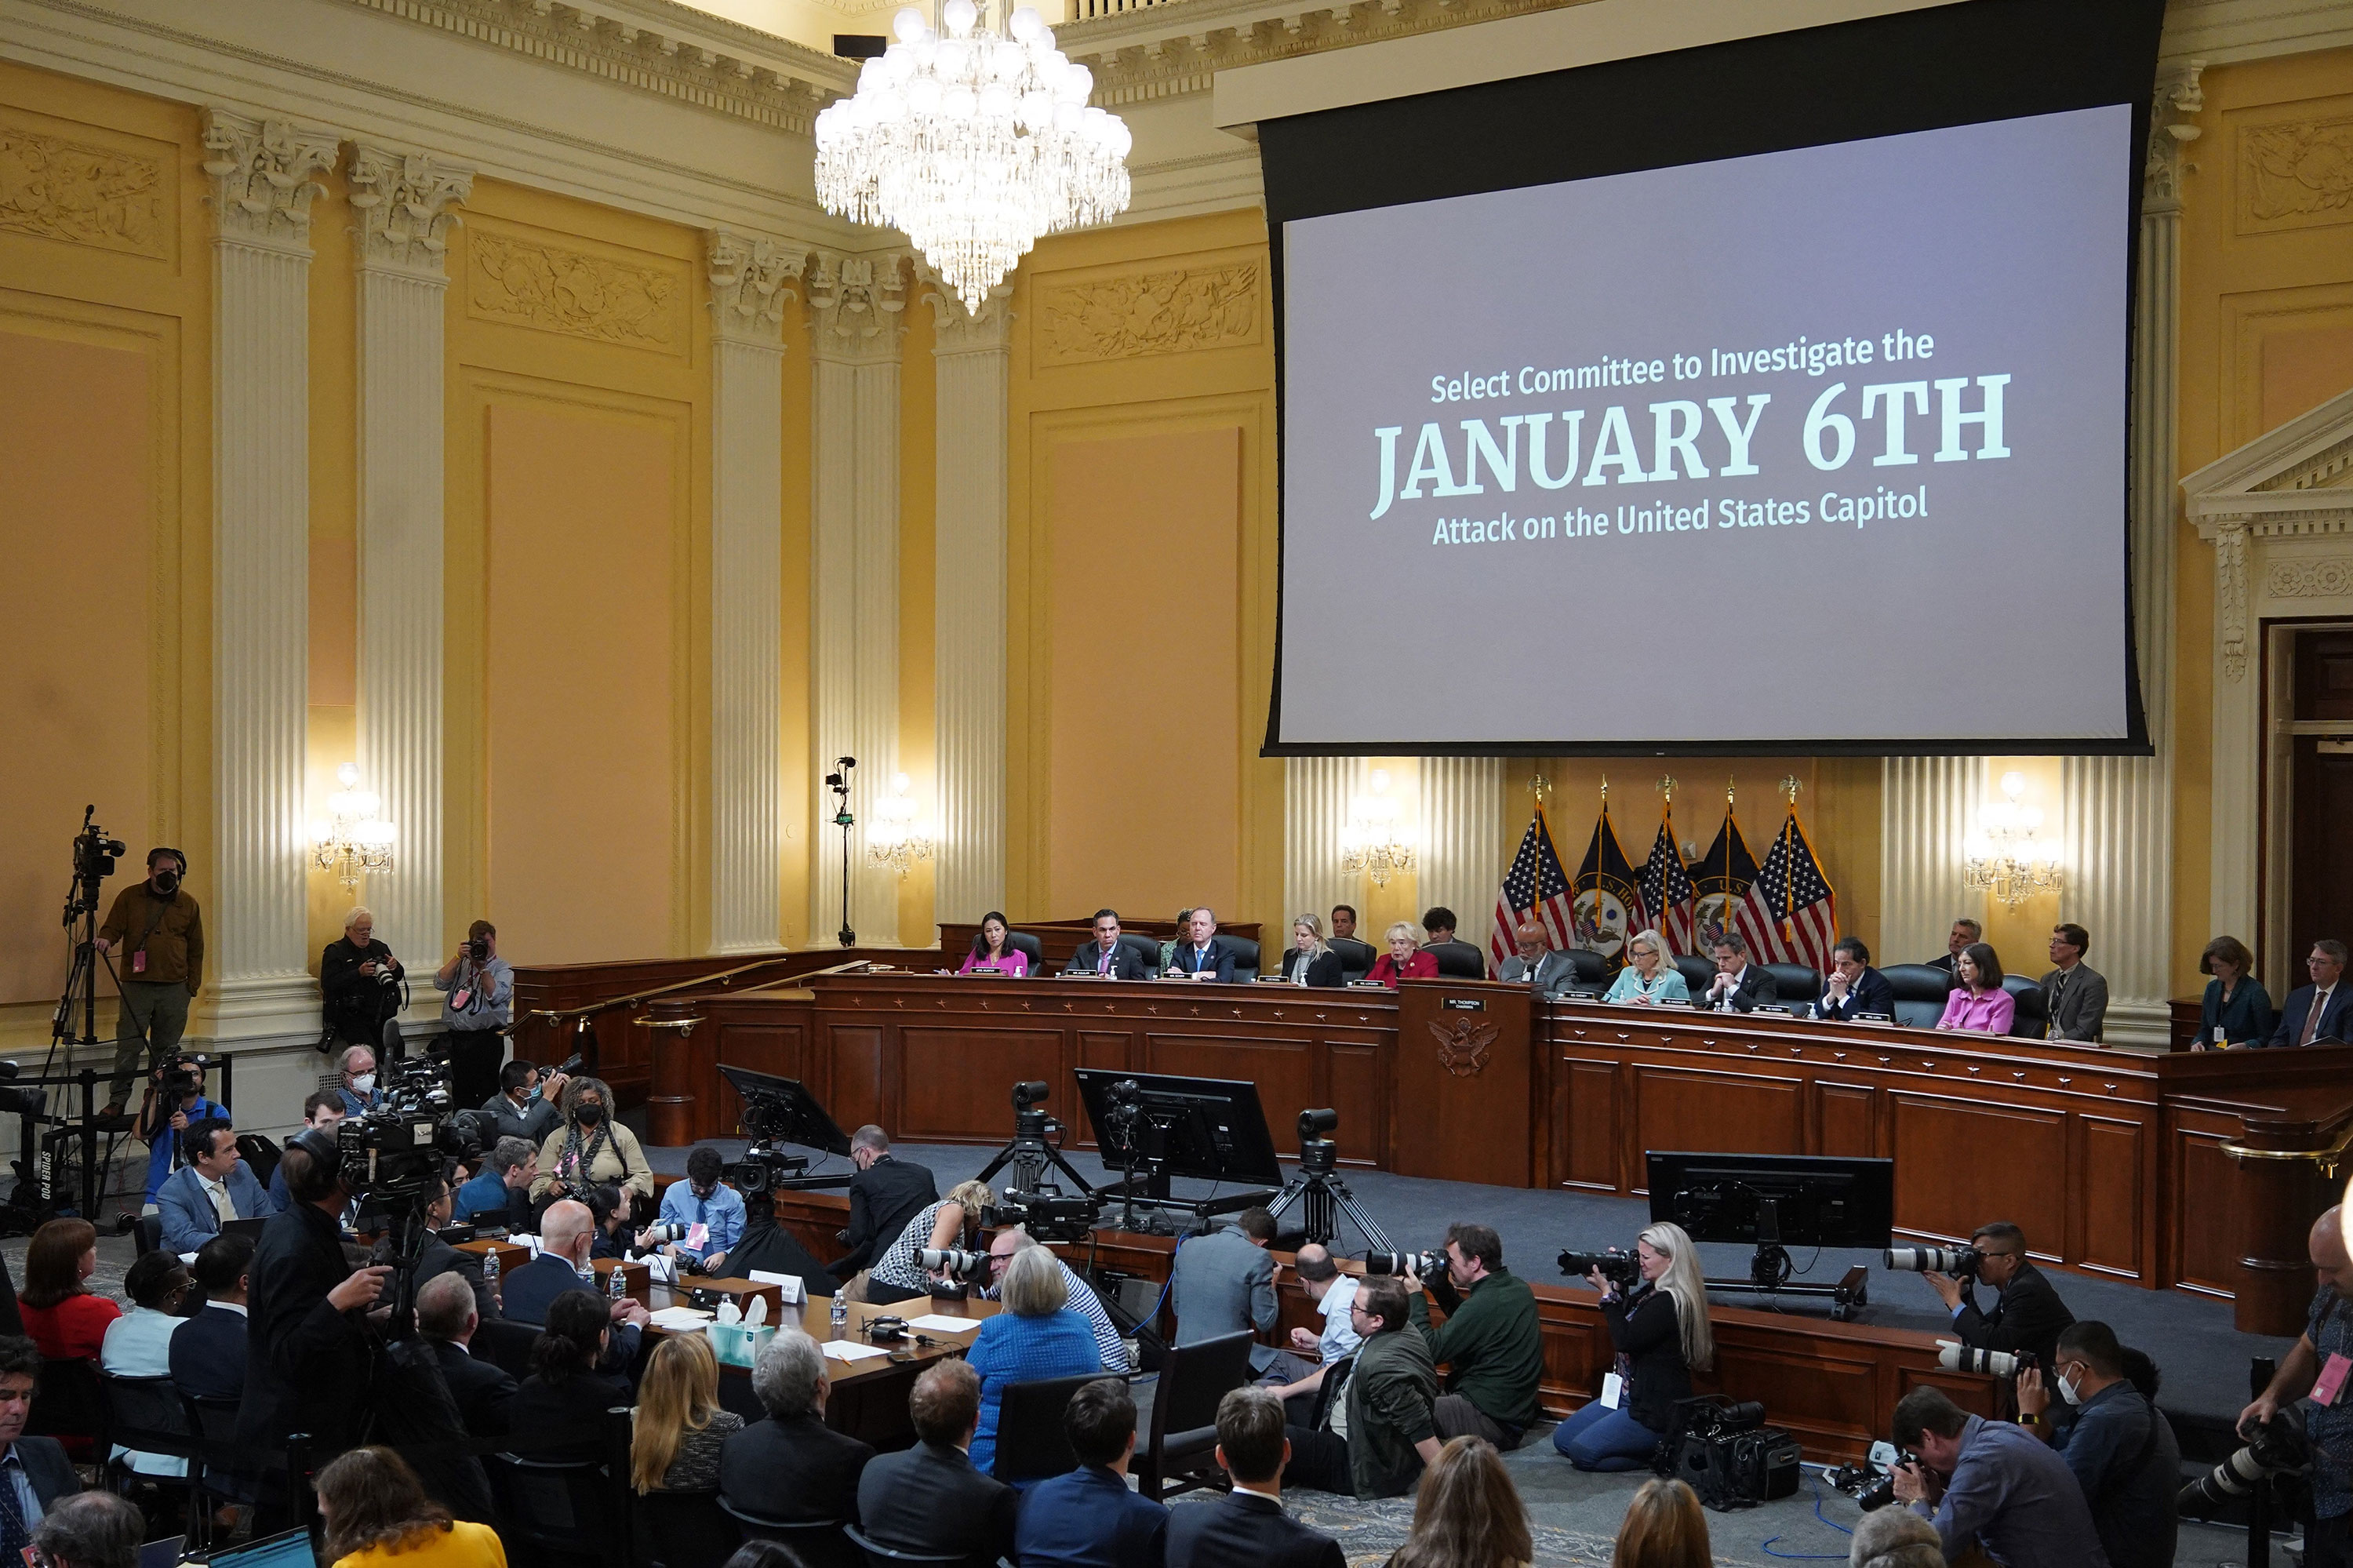 A general view shows the House Select Committee hearing in session on Monday.